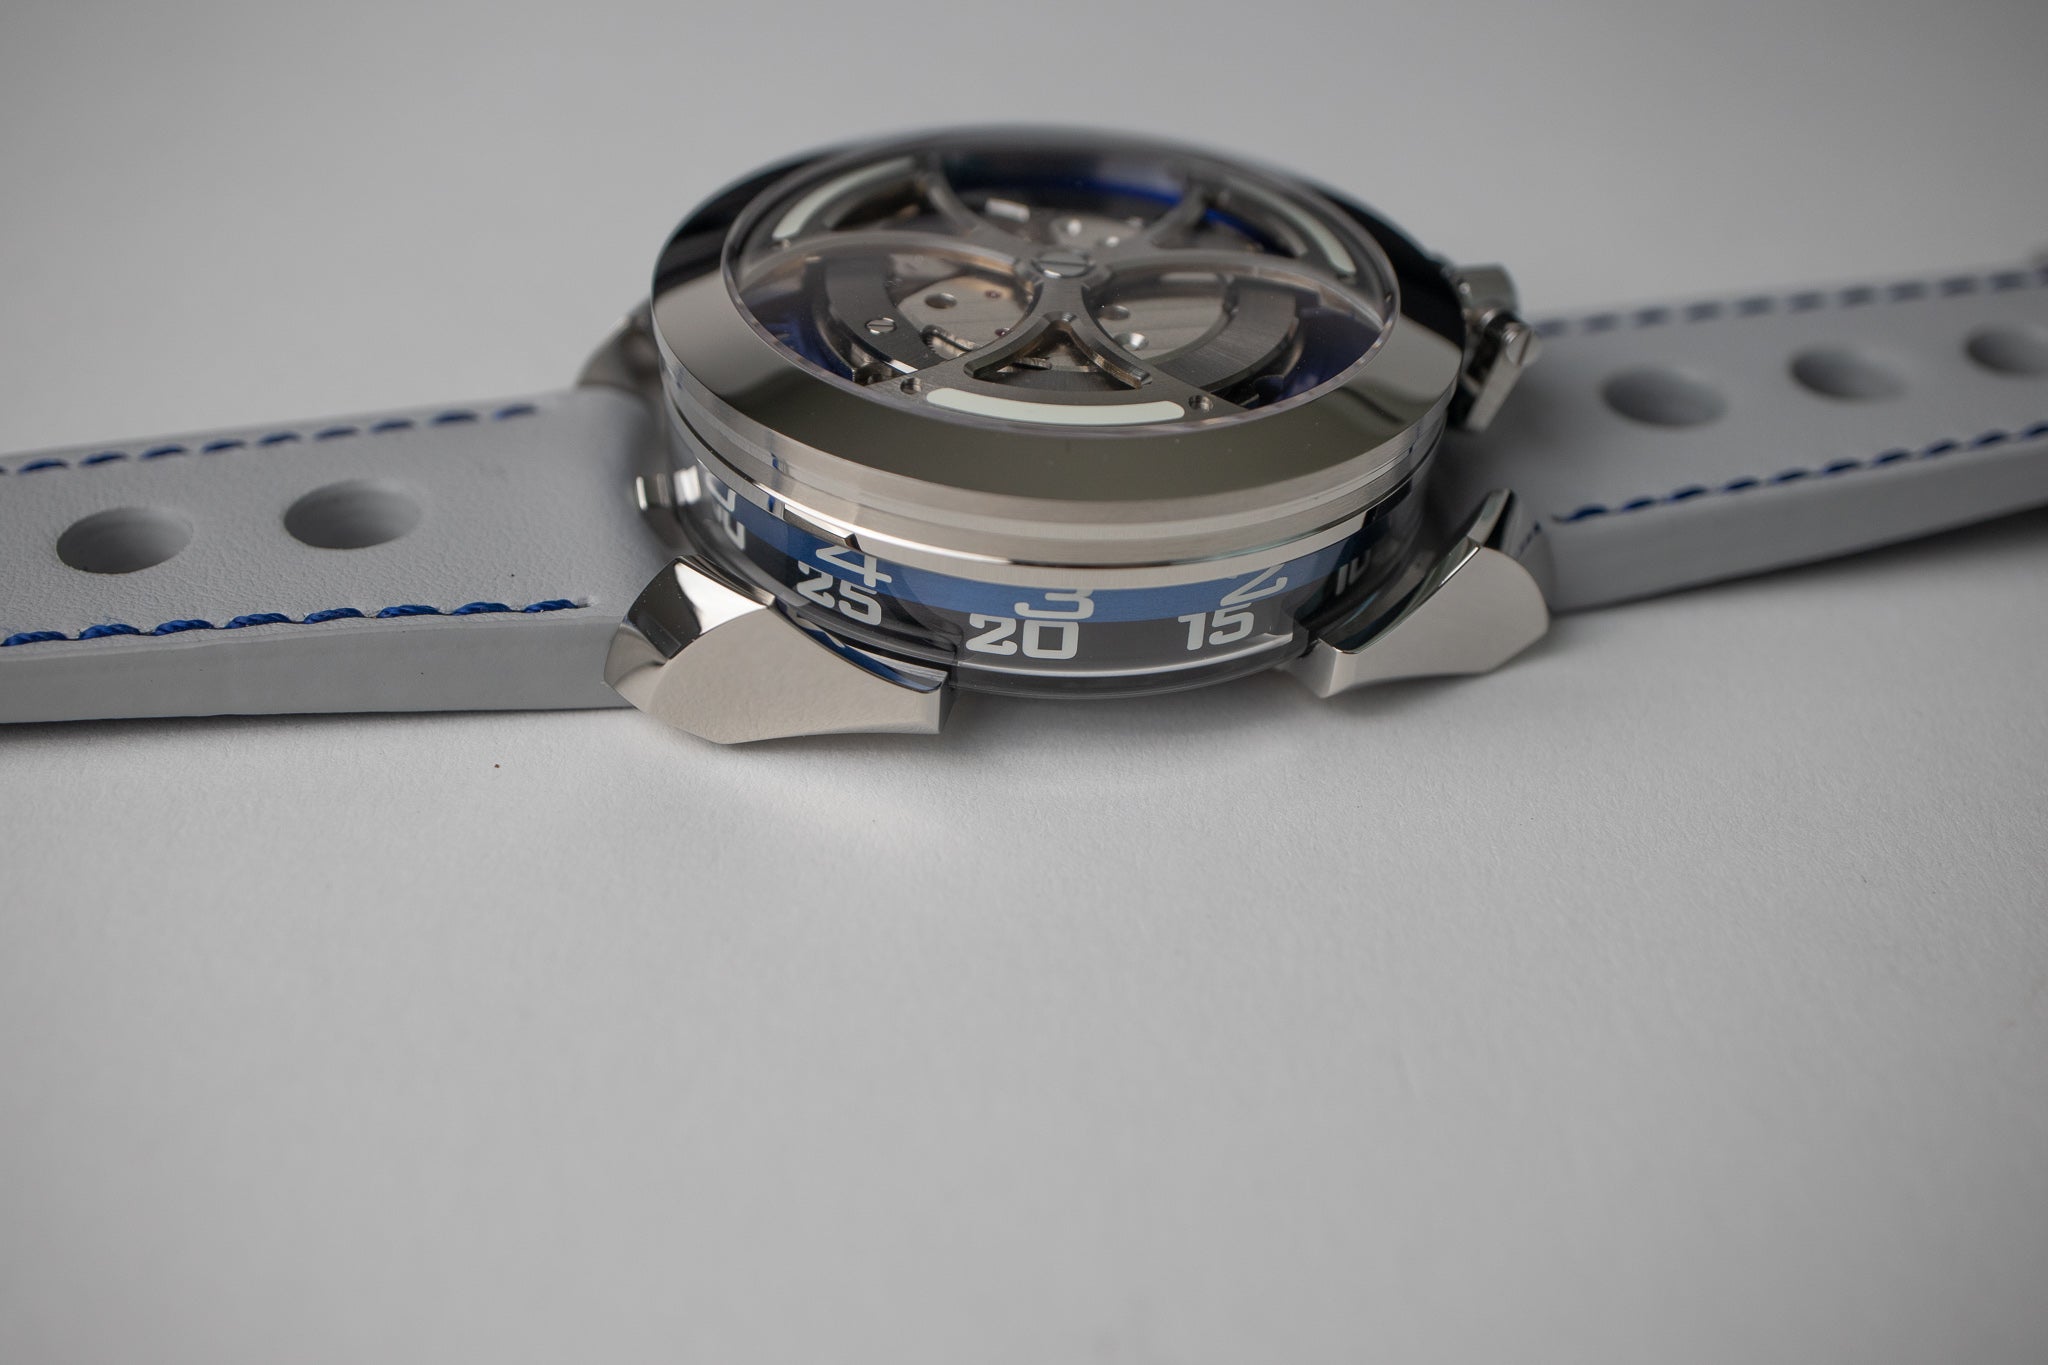 MB&F M.A.D Edition MAD1 Project